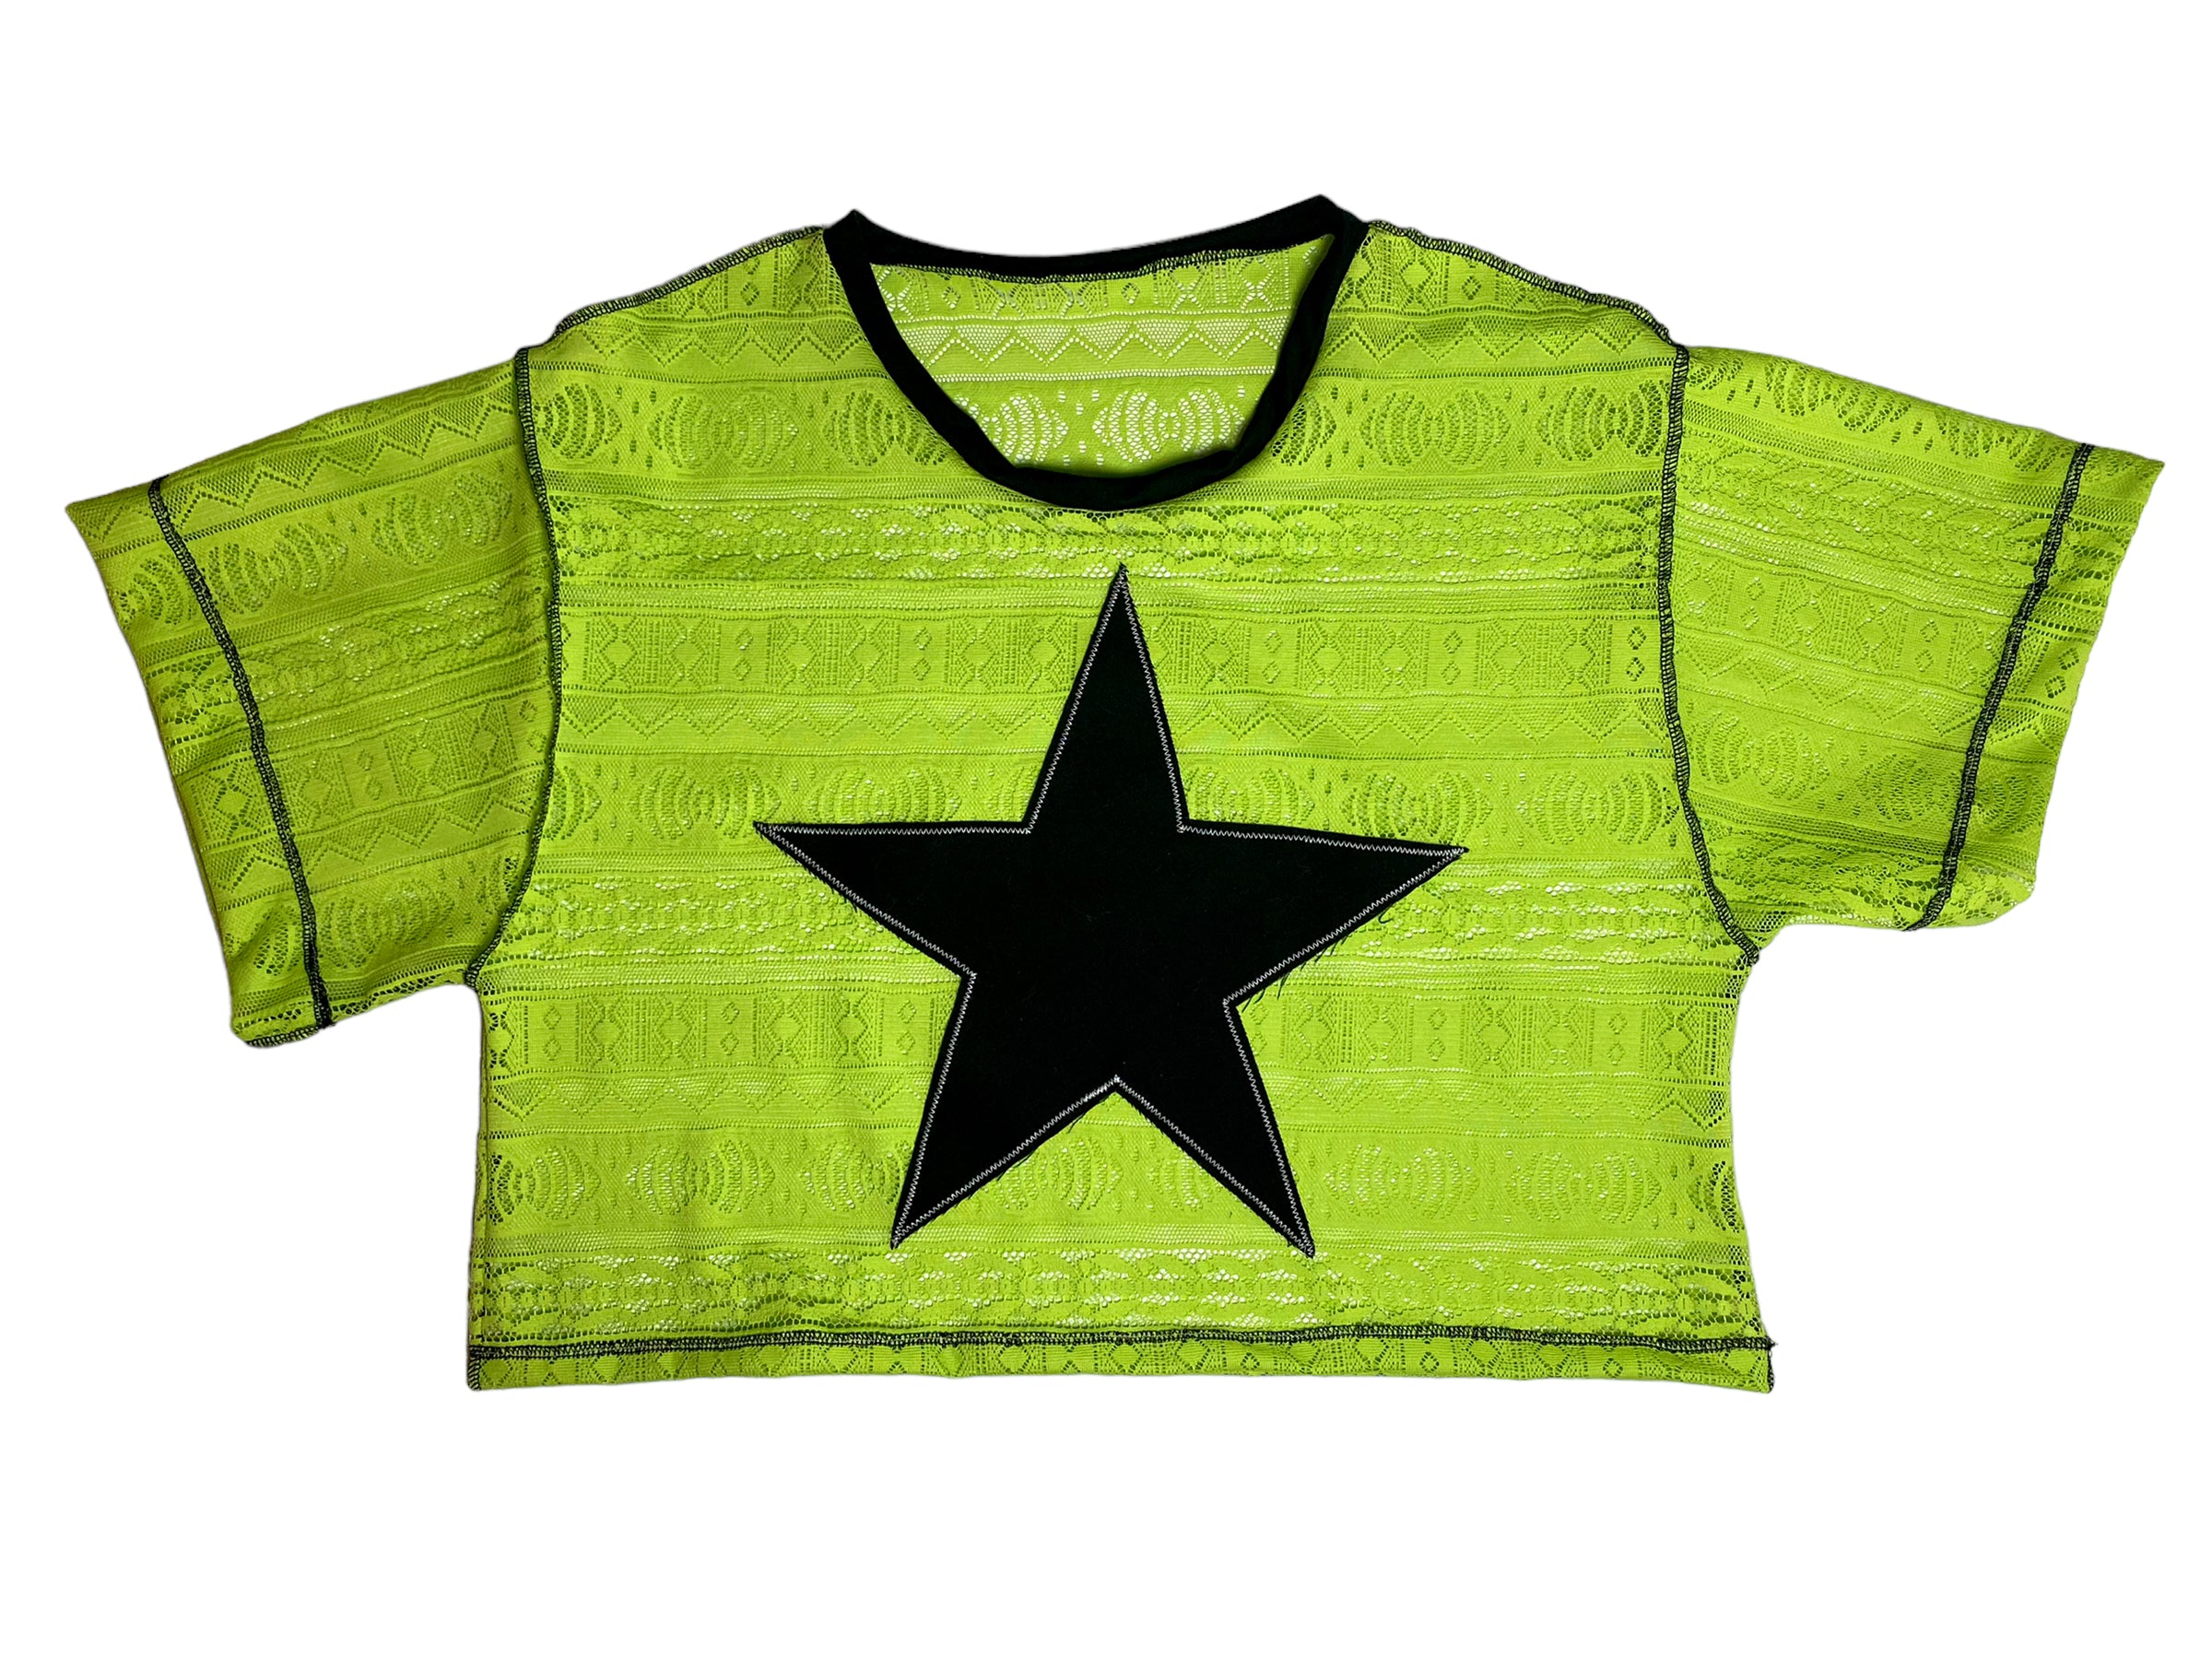 Celestial Star Cropped T-shirt